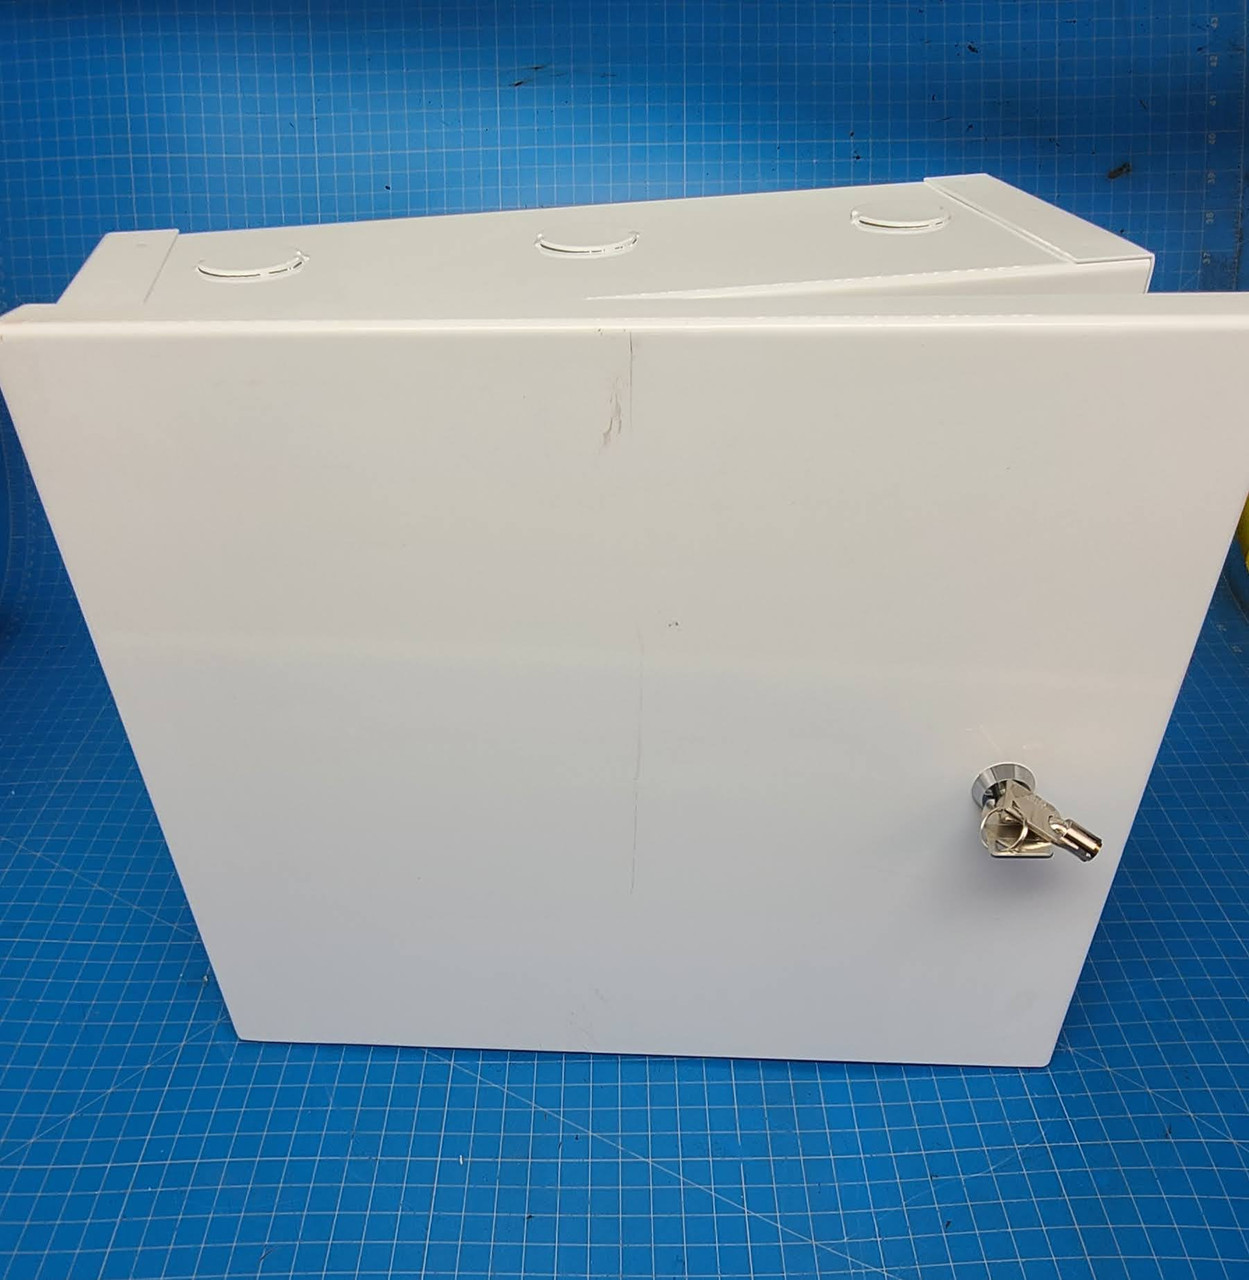 Multi-Purpose Industrial Lockable Cabinet 56 x 38 x 13 White Steel Surface Mounted